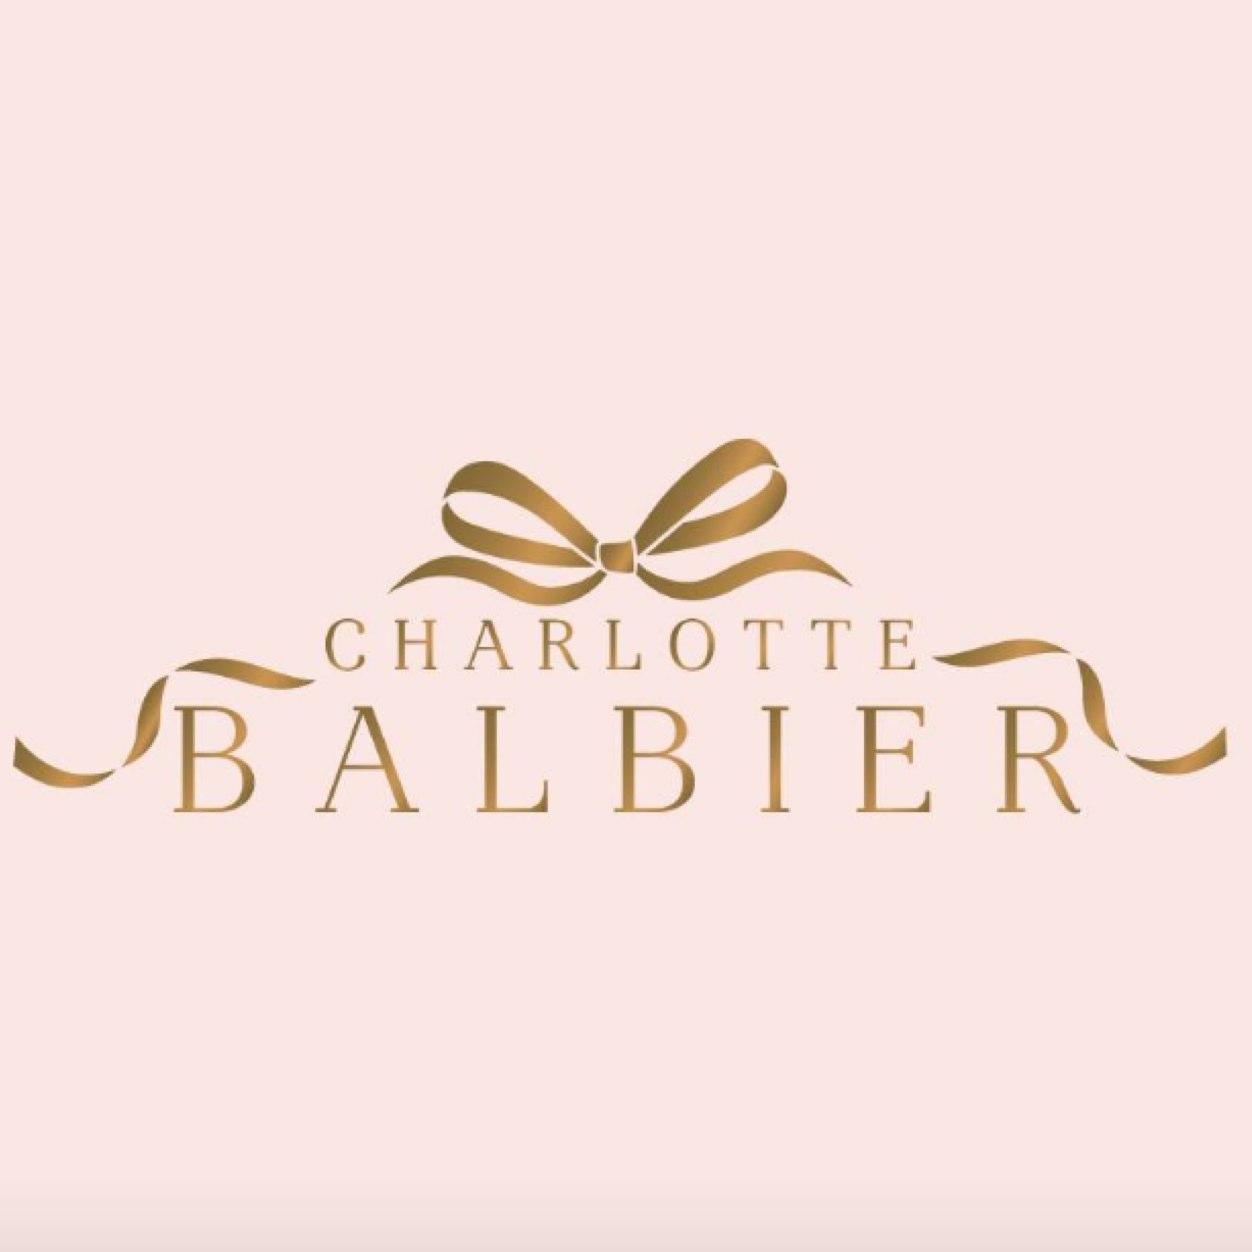 Charlotte Balbier Bridal. Boho pretty gowns & separates for the unique & individual modern princess brides of today 💗